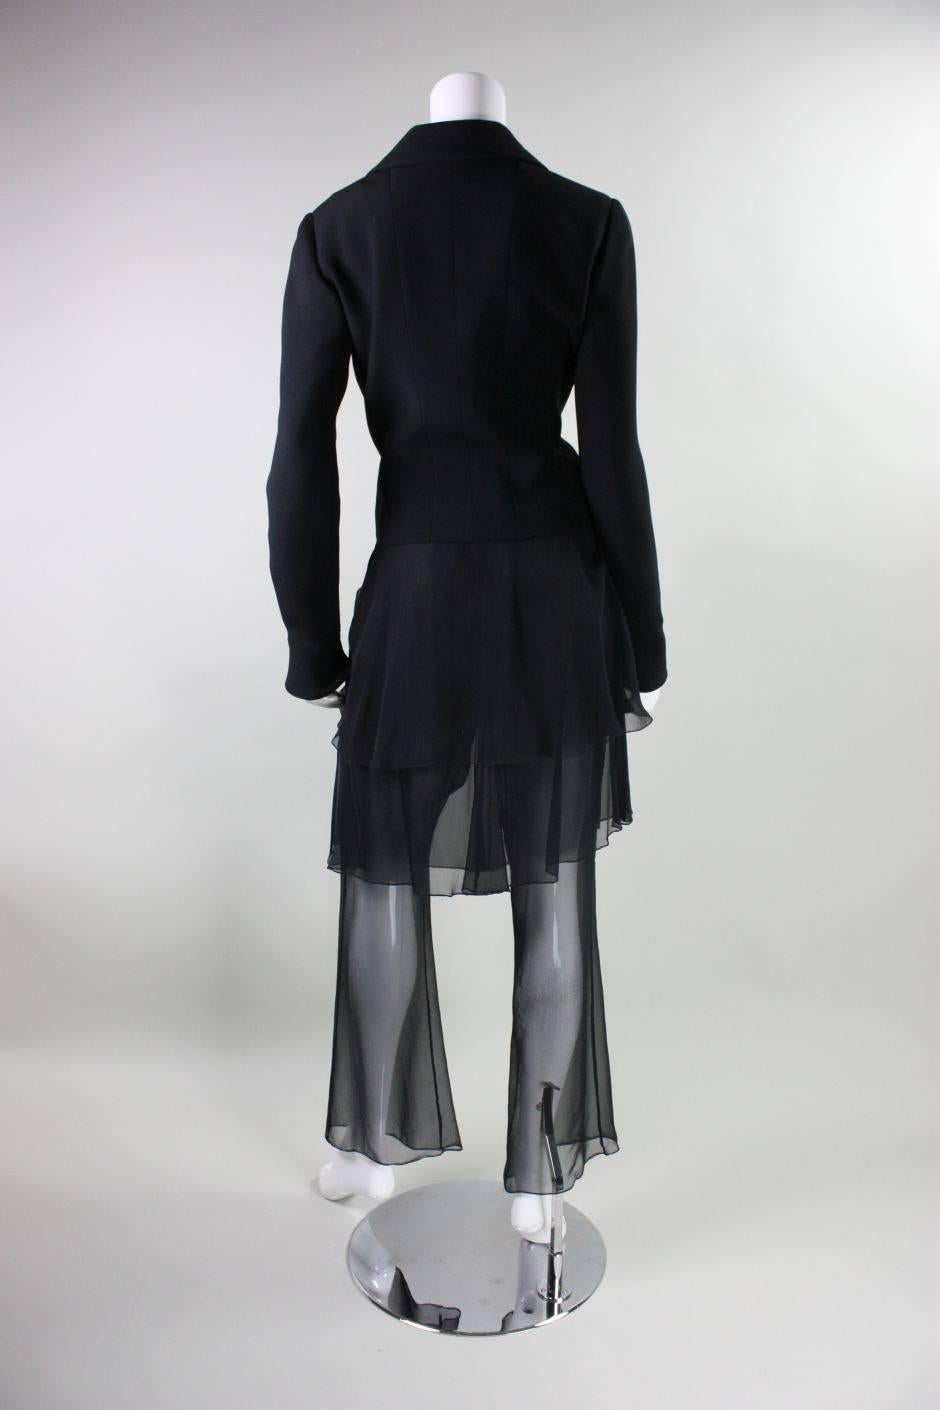 Women's 1990's Karl Lagerfeld Chiffon Ensemble with Insect Embellishments For Sale